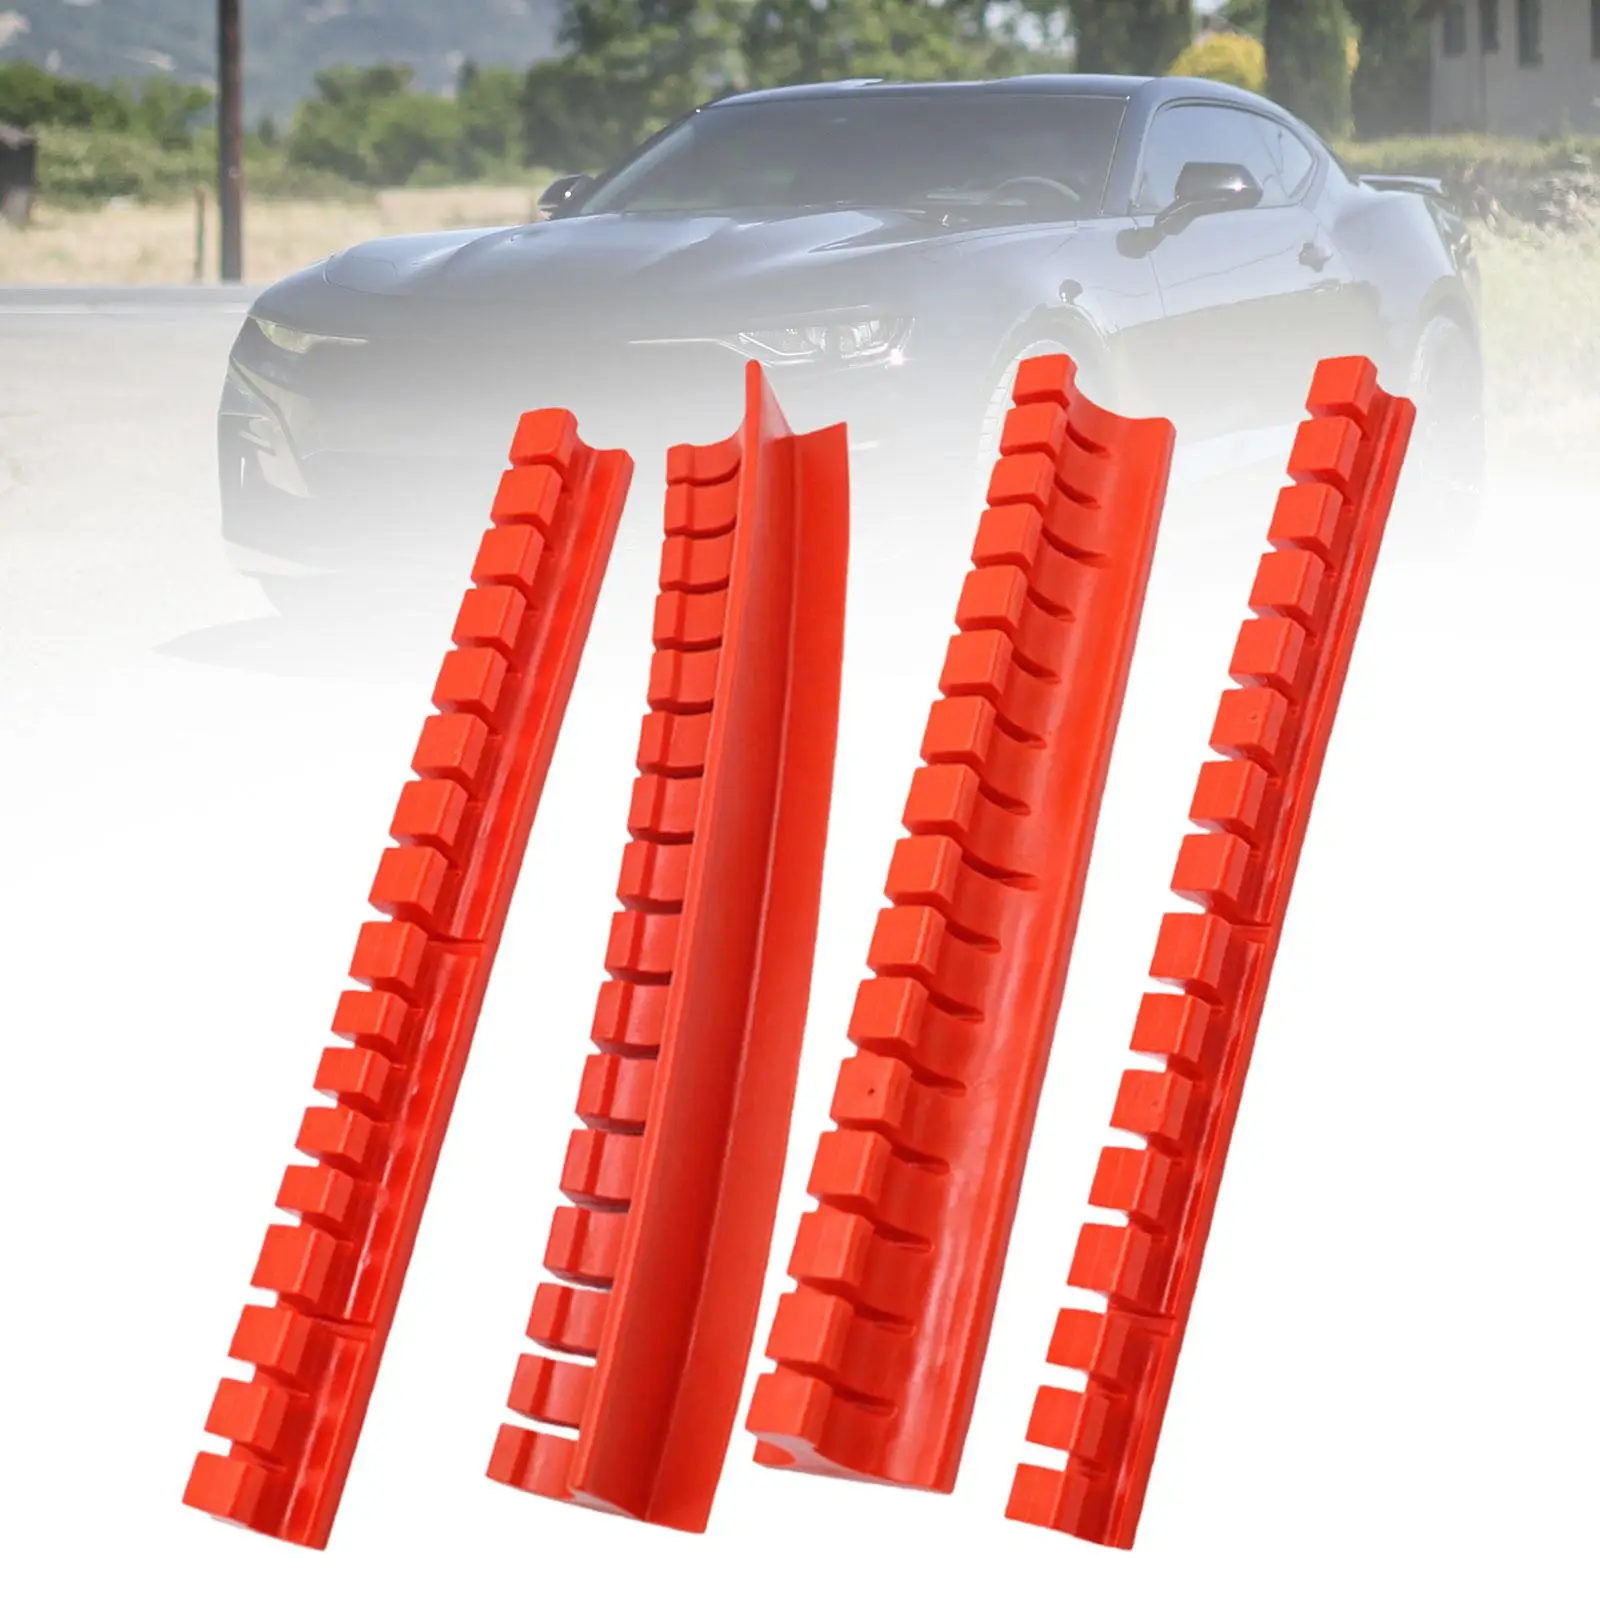 

4x Puller Tabs Generic Dents Repair Tool for Vehicle Automotive SUV